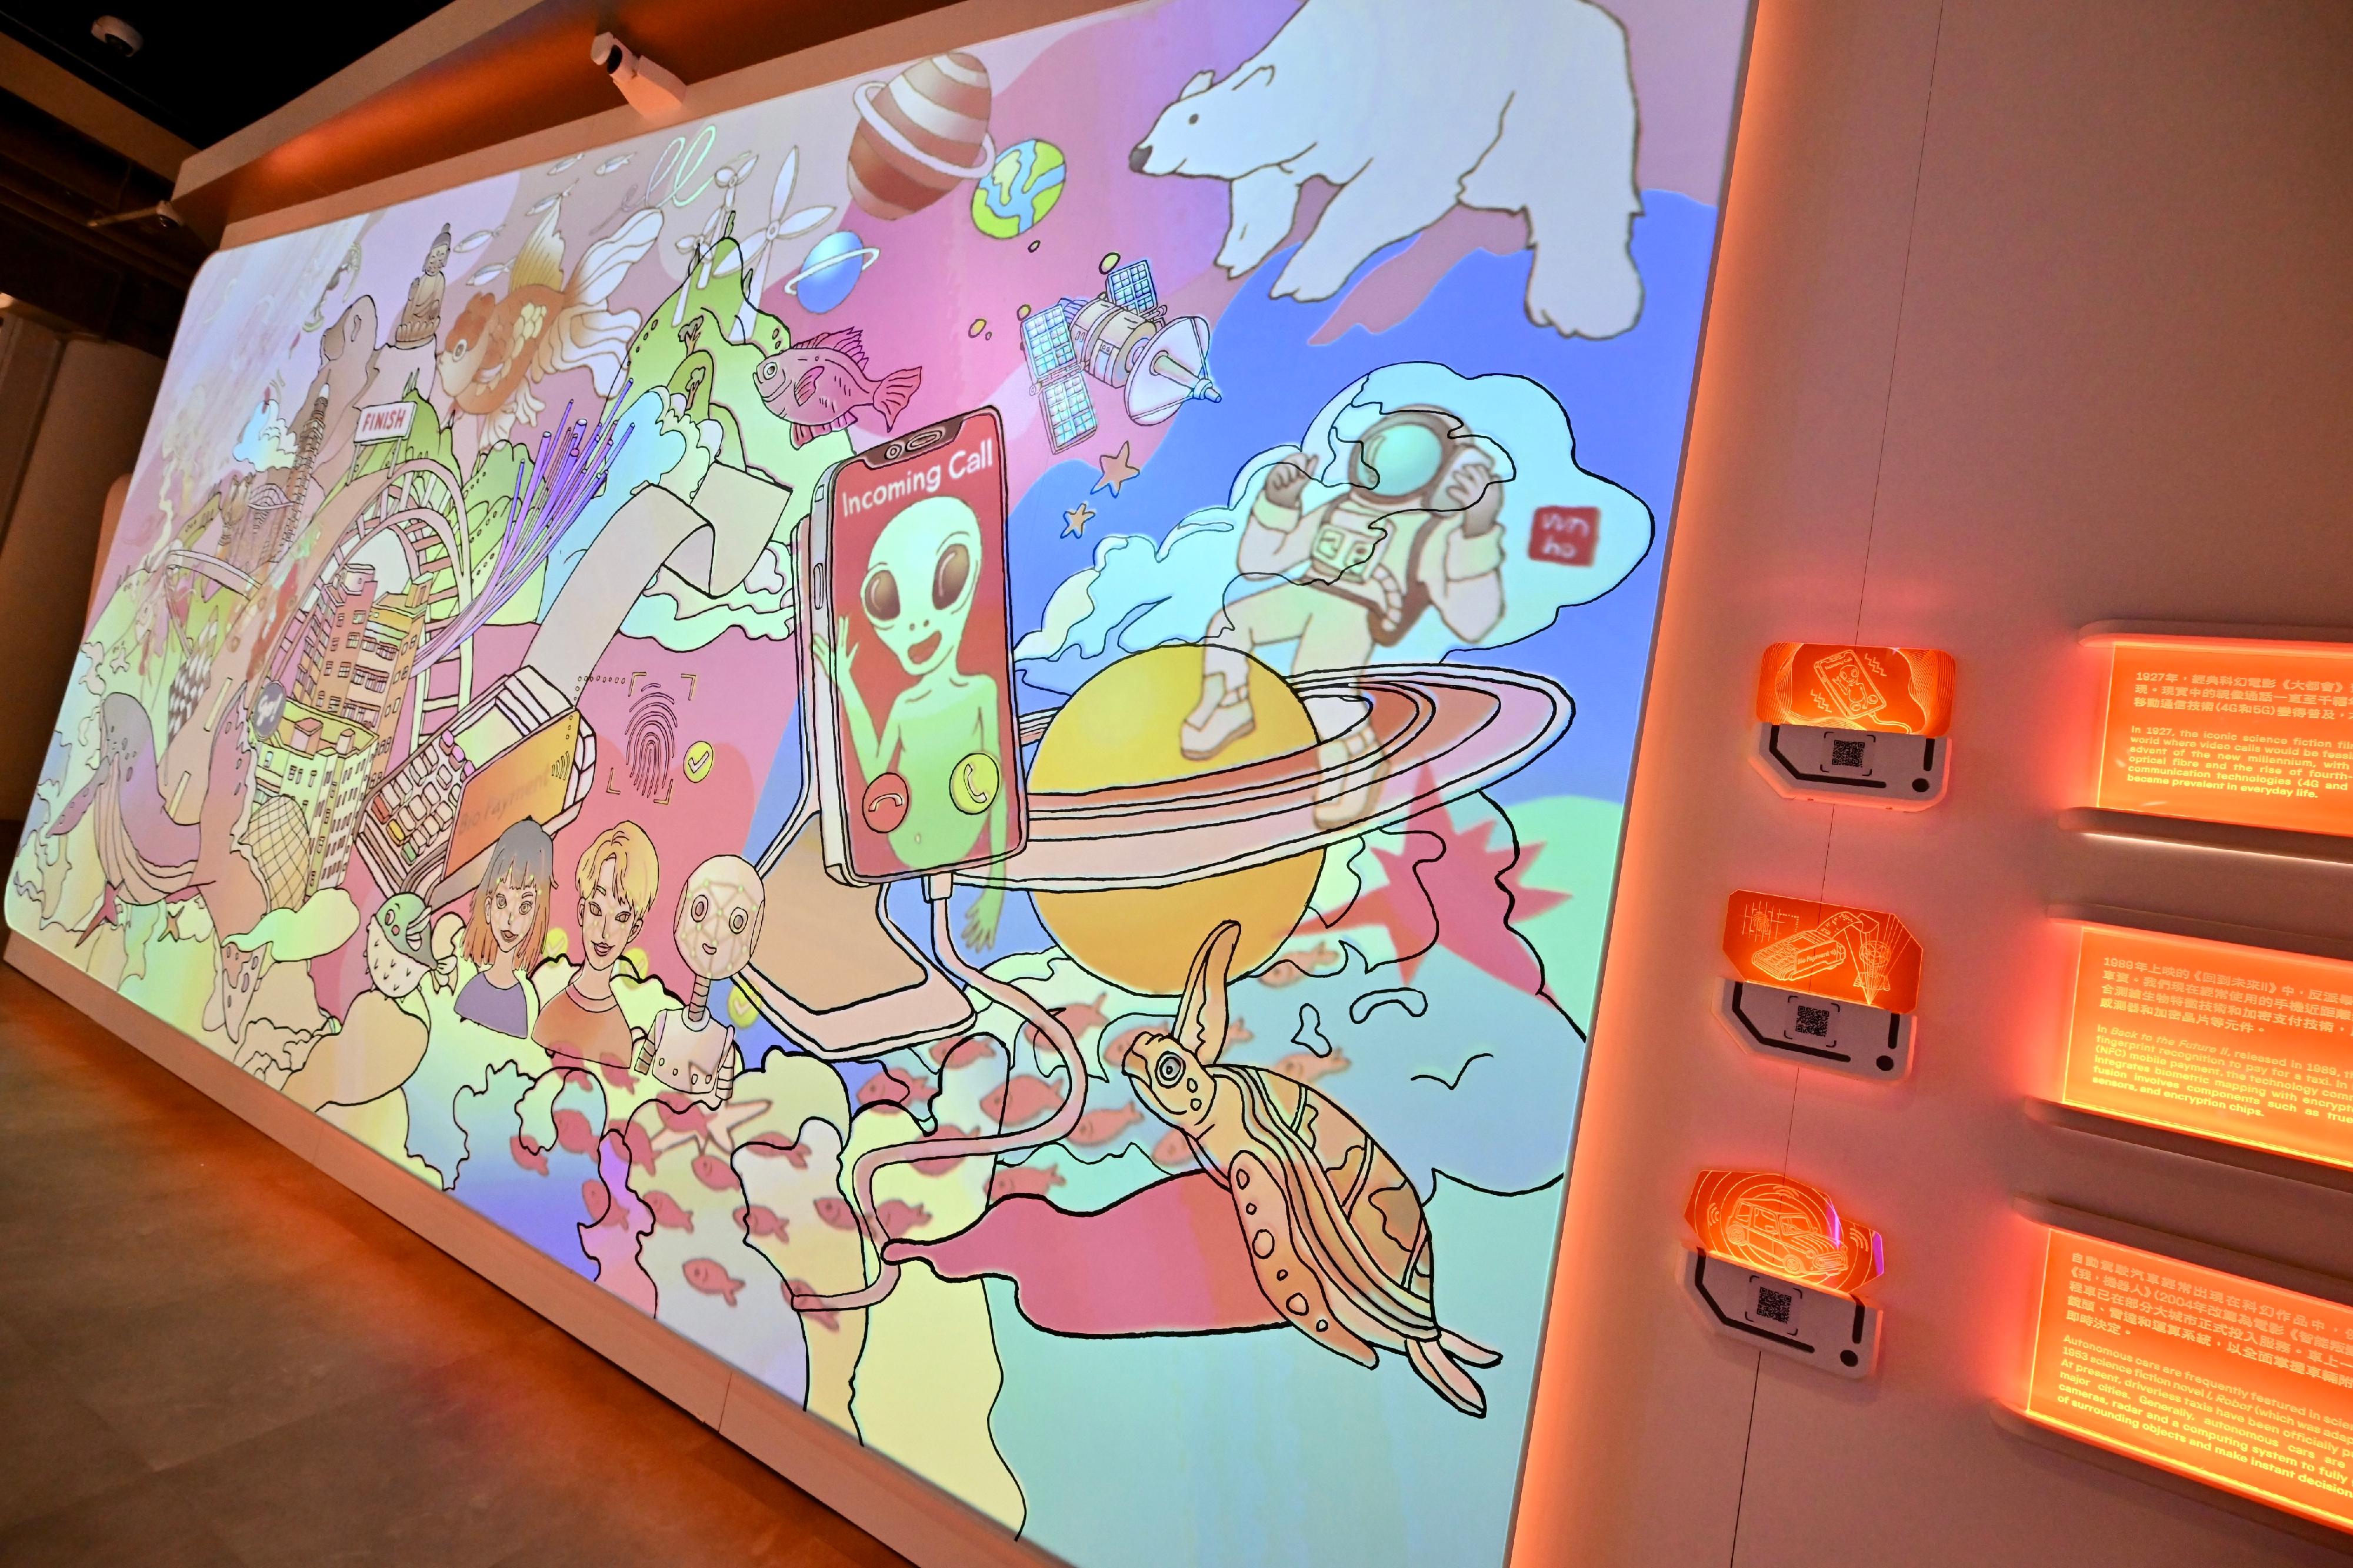 The Hong Kong Science Museum will launch a new special exhibition, "Science Fiction: Voyage to the Edge of Imagination", tomorrow (December 15). Photo shows a mural created by local artist Vivian Ho, which showcases the intersection of science fiction and technological advancement with animation. 